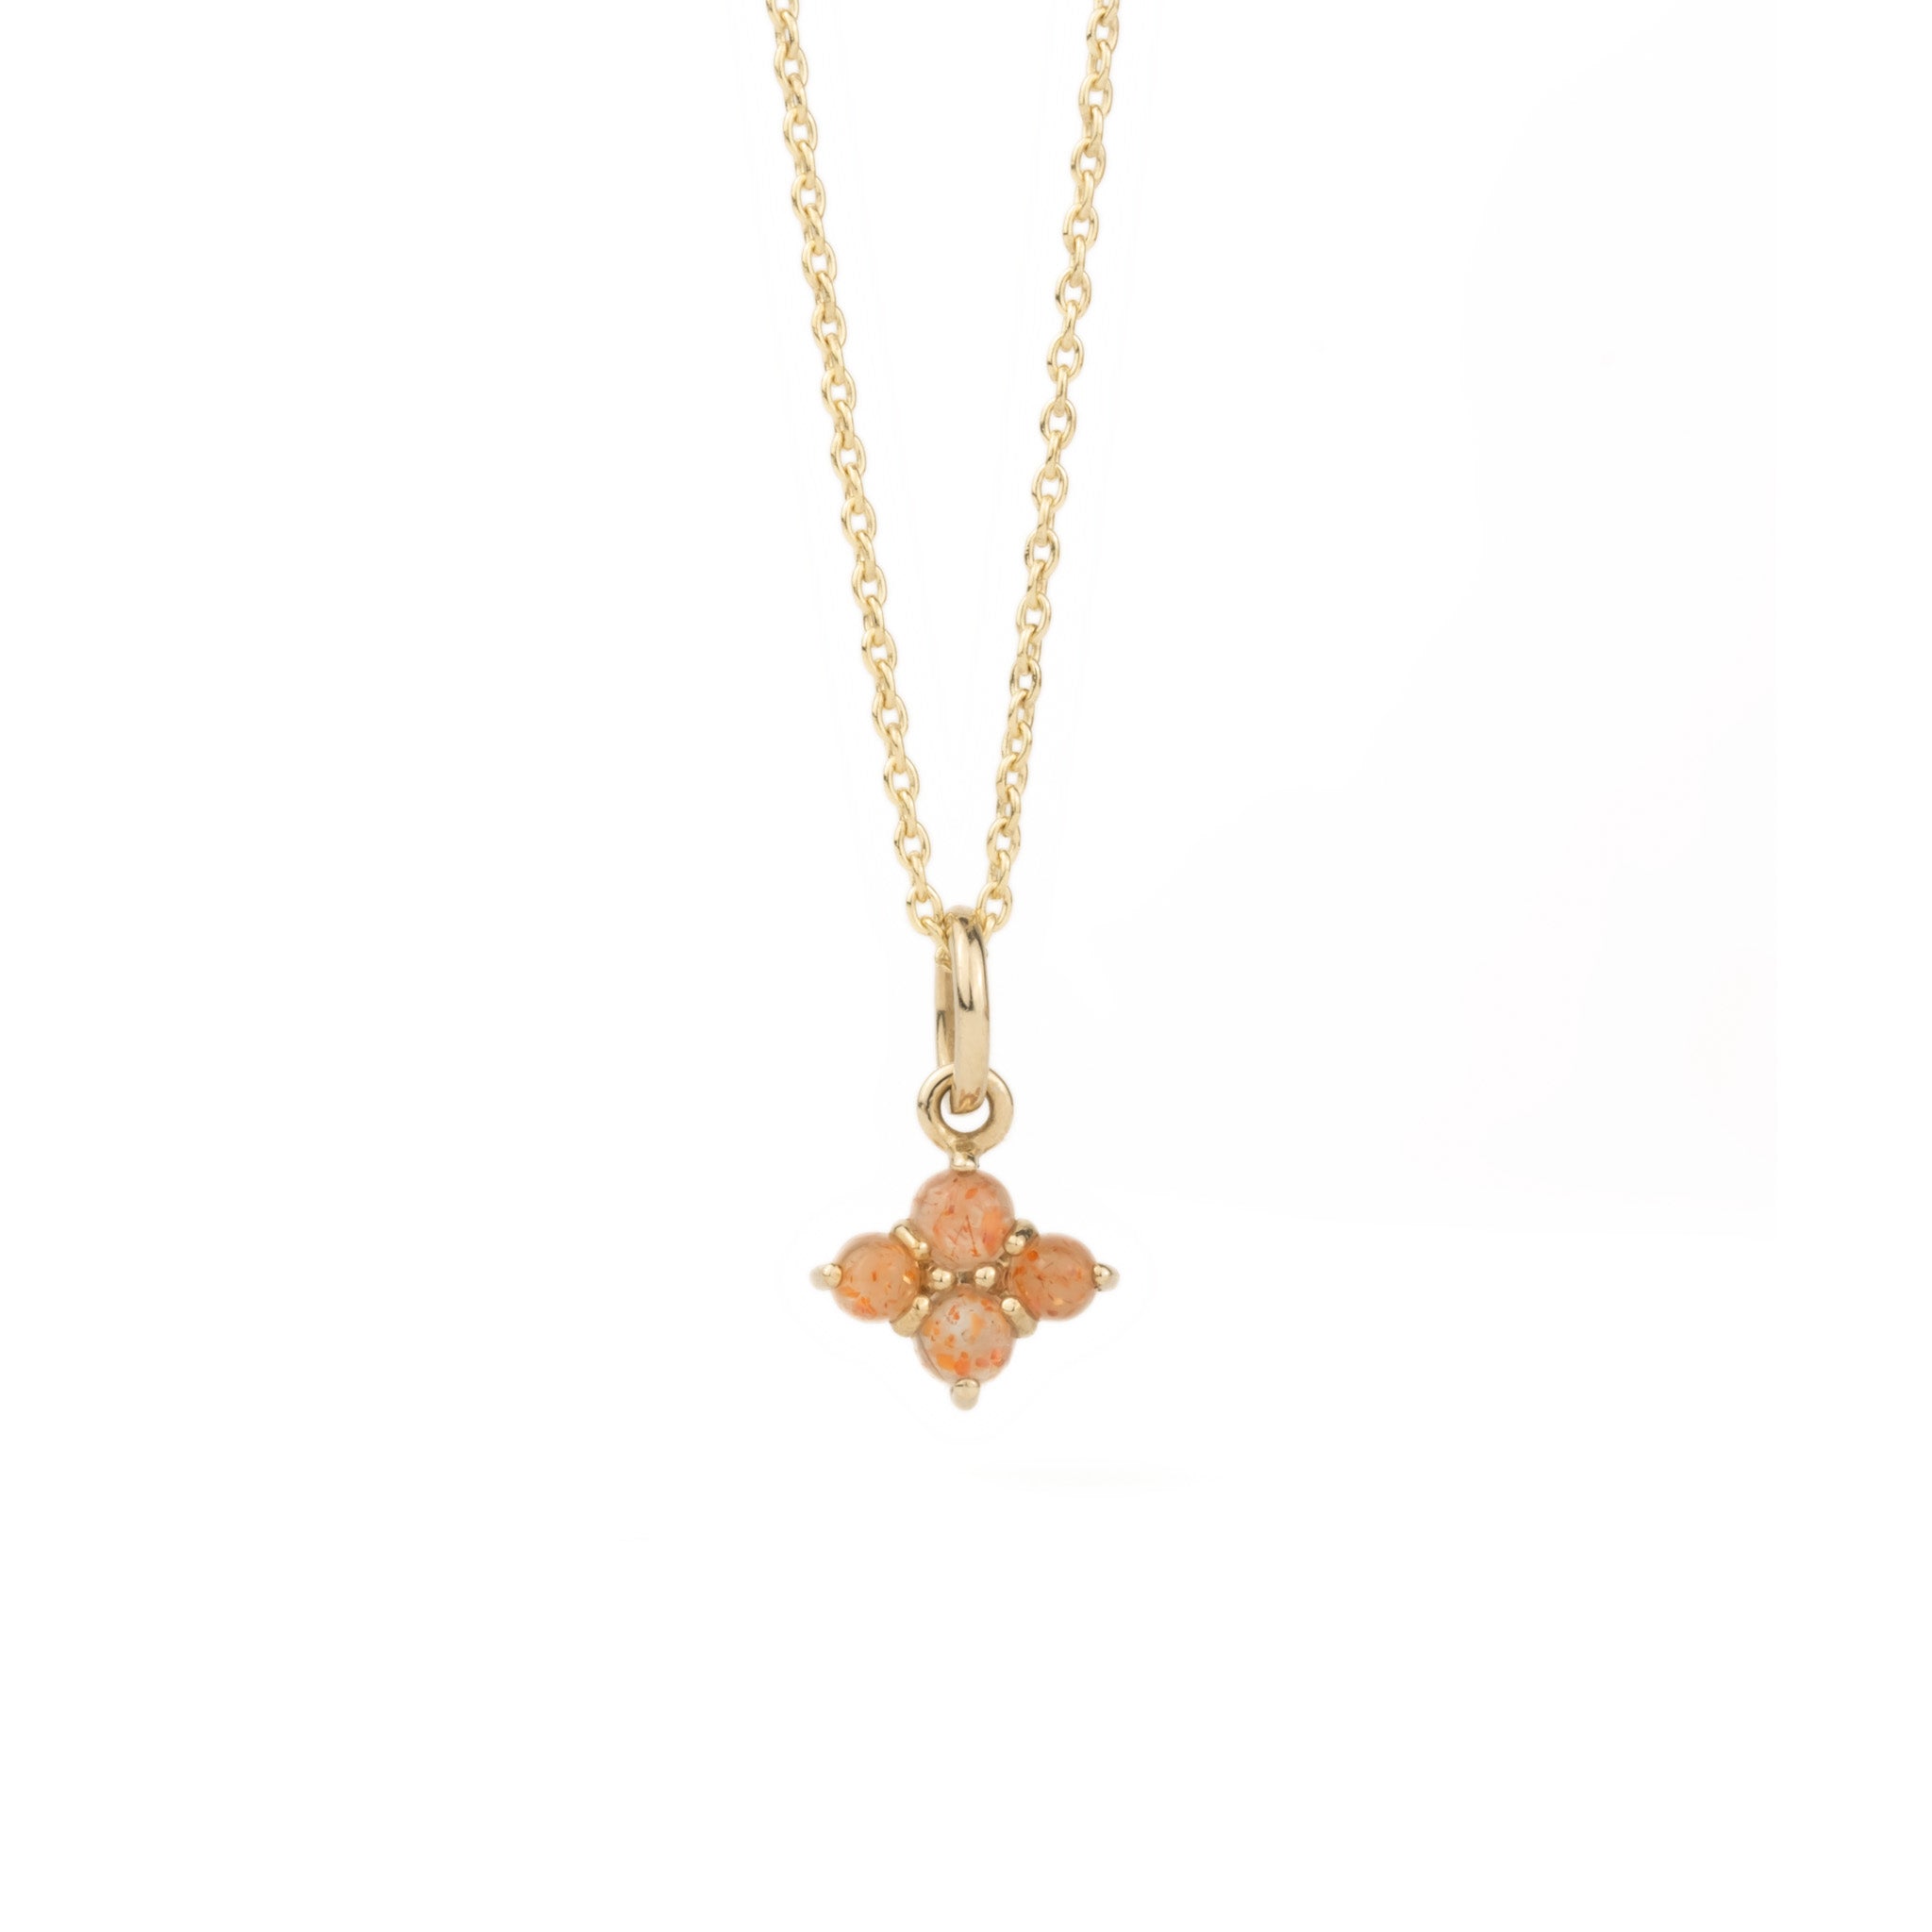 Aiden Jae Sunrise Charm Necklace in yellow gold and sunstone.